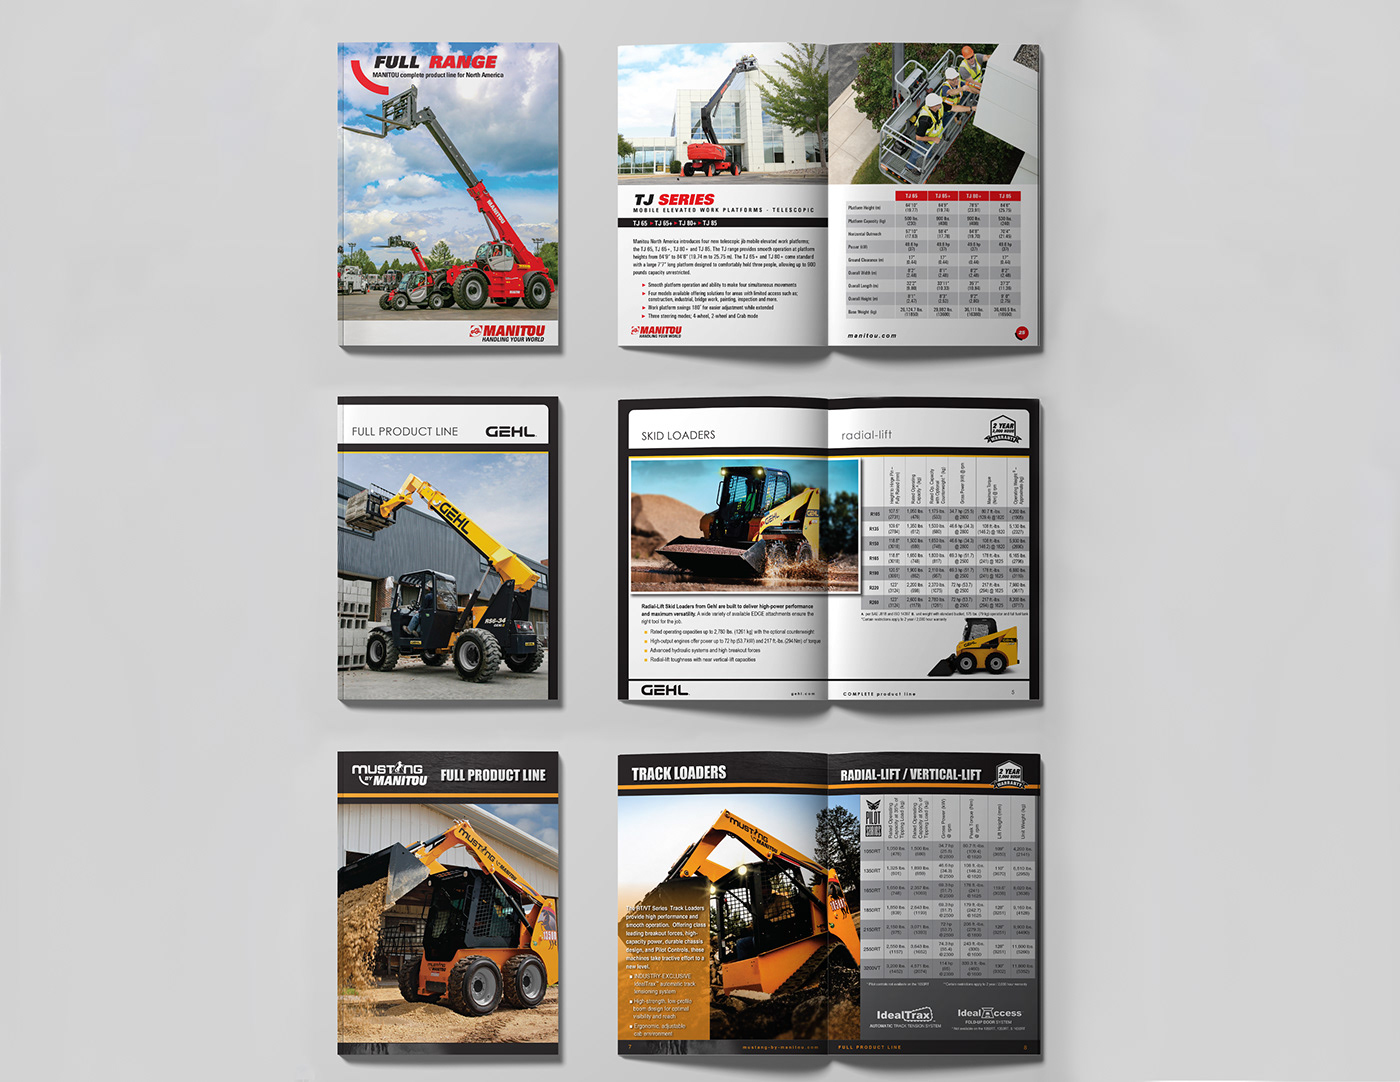 manitou Gehl Booklet brochure Layout design construction page layout equipment Heavy